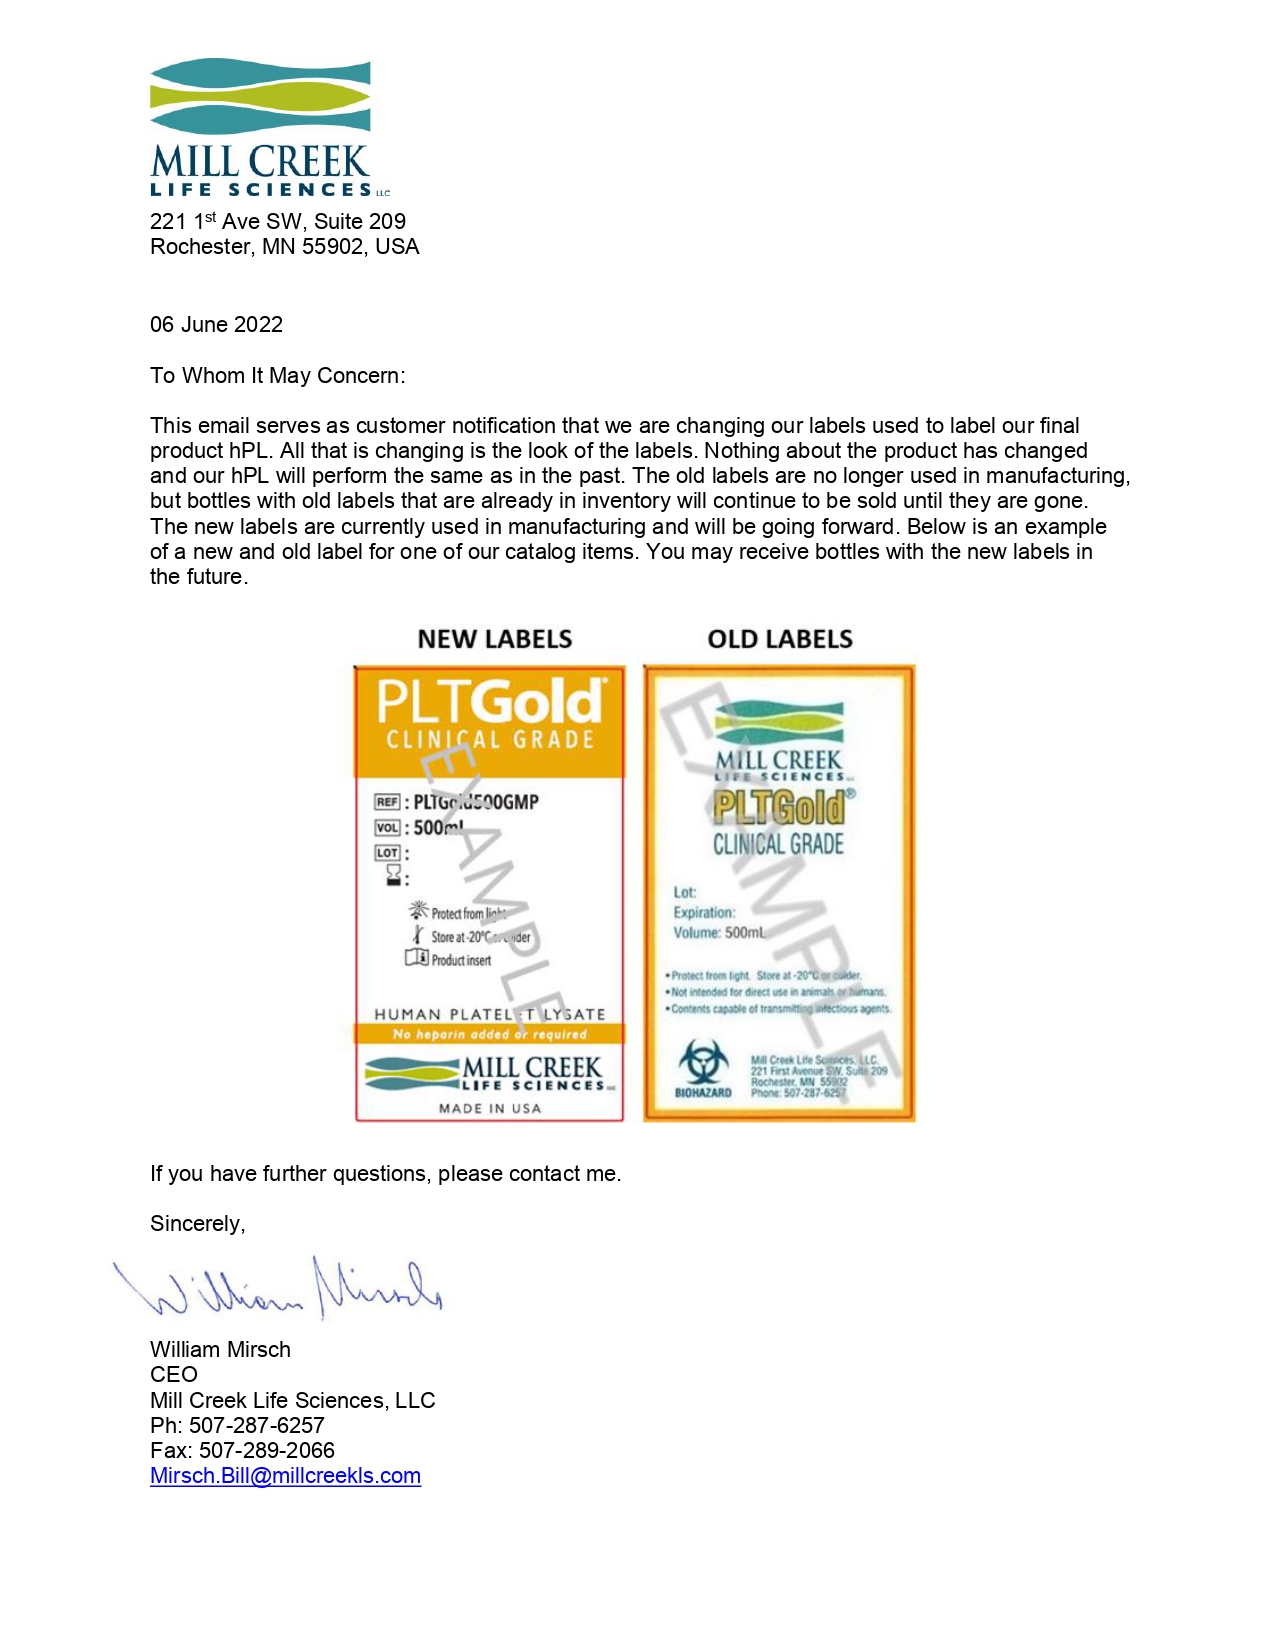 Millcreek-PLT-Product Label Change Letter_pages-to-jpg-0001